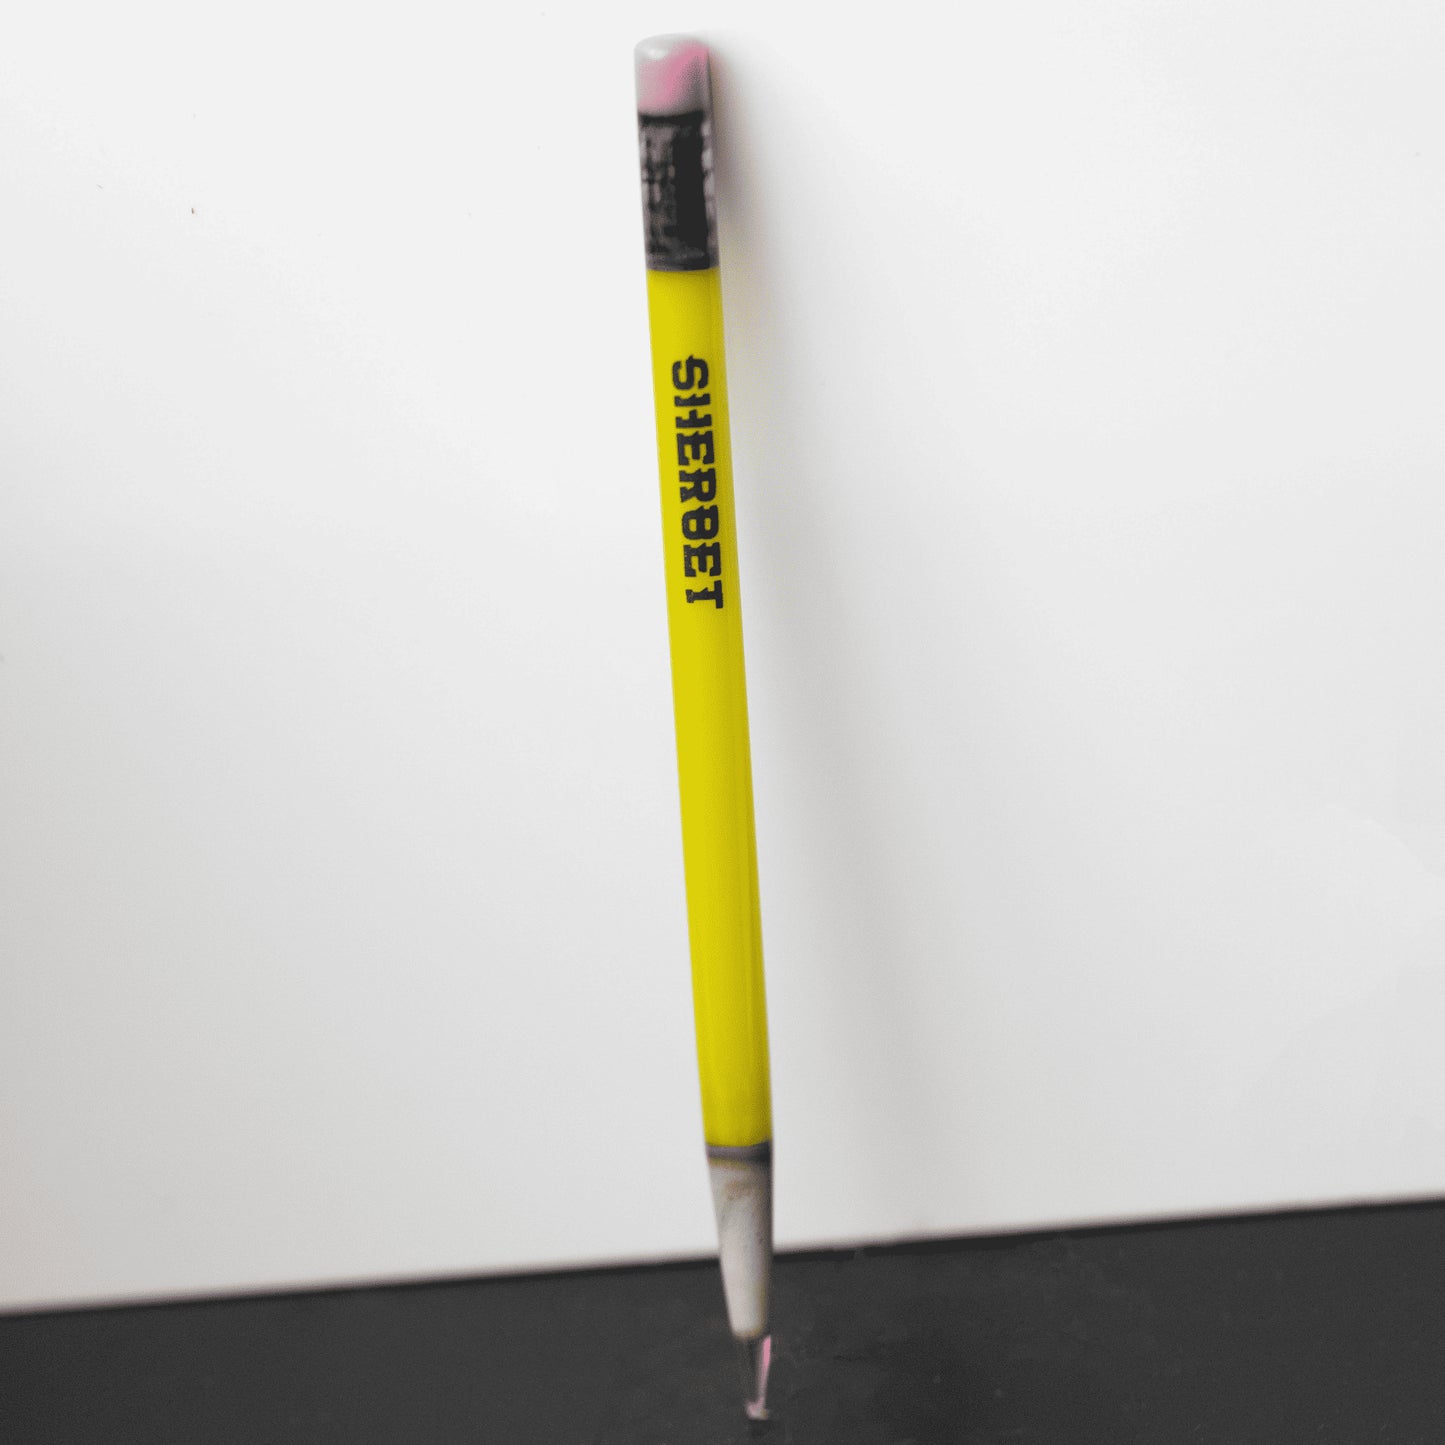 exquisite art piece - Labeled Pencil (D) by Sherbet Glass